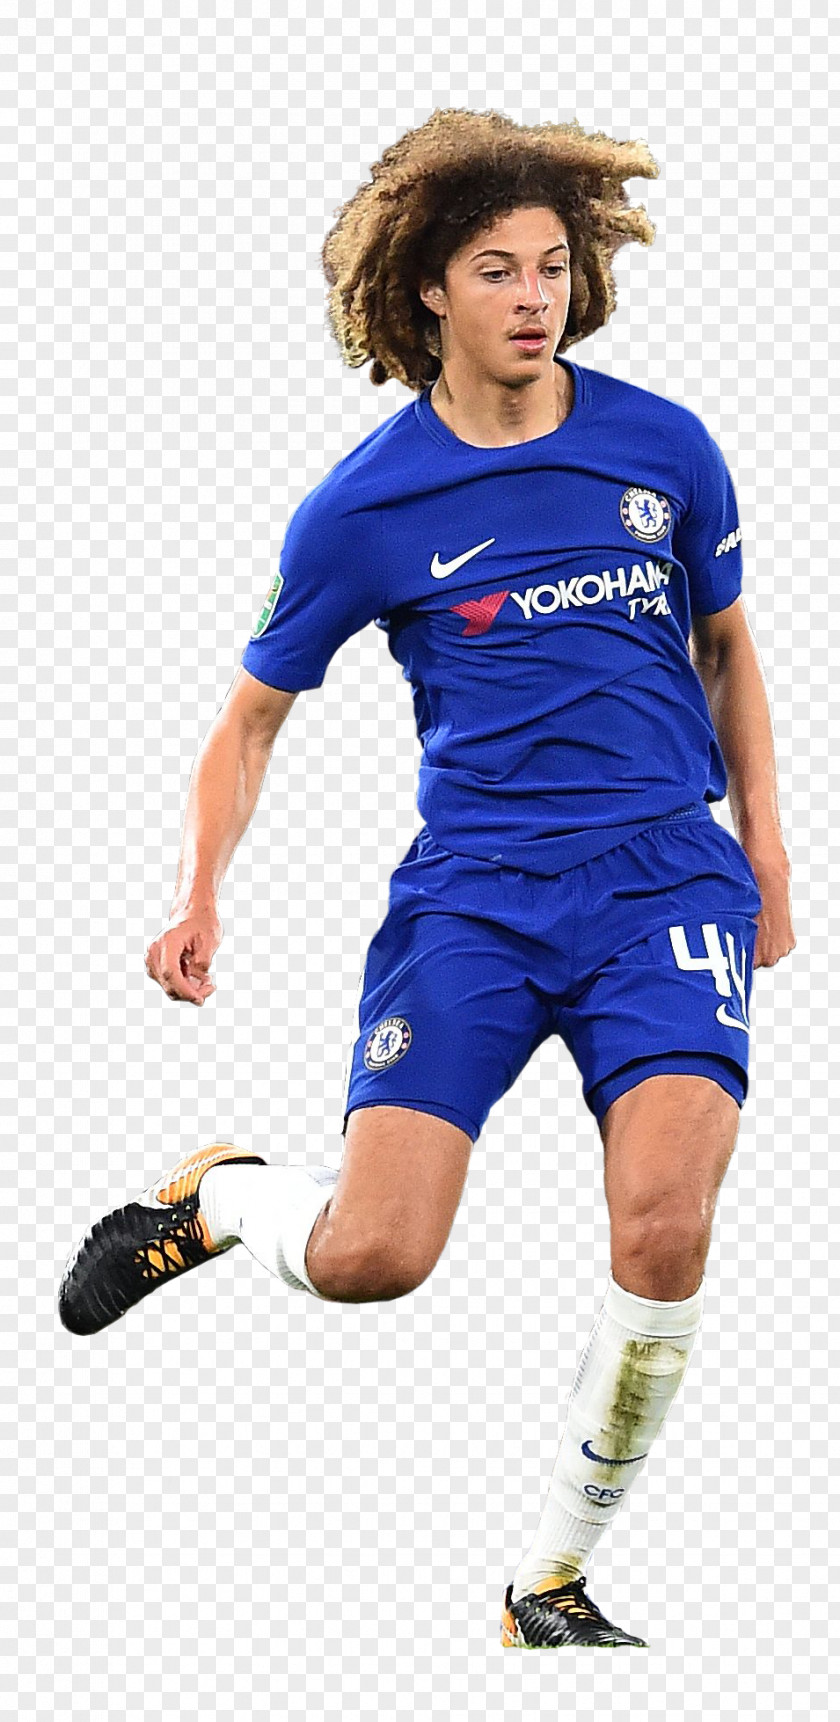 Football Chelsea F.C. Sports Player Jersey PNG